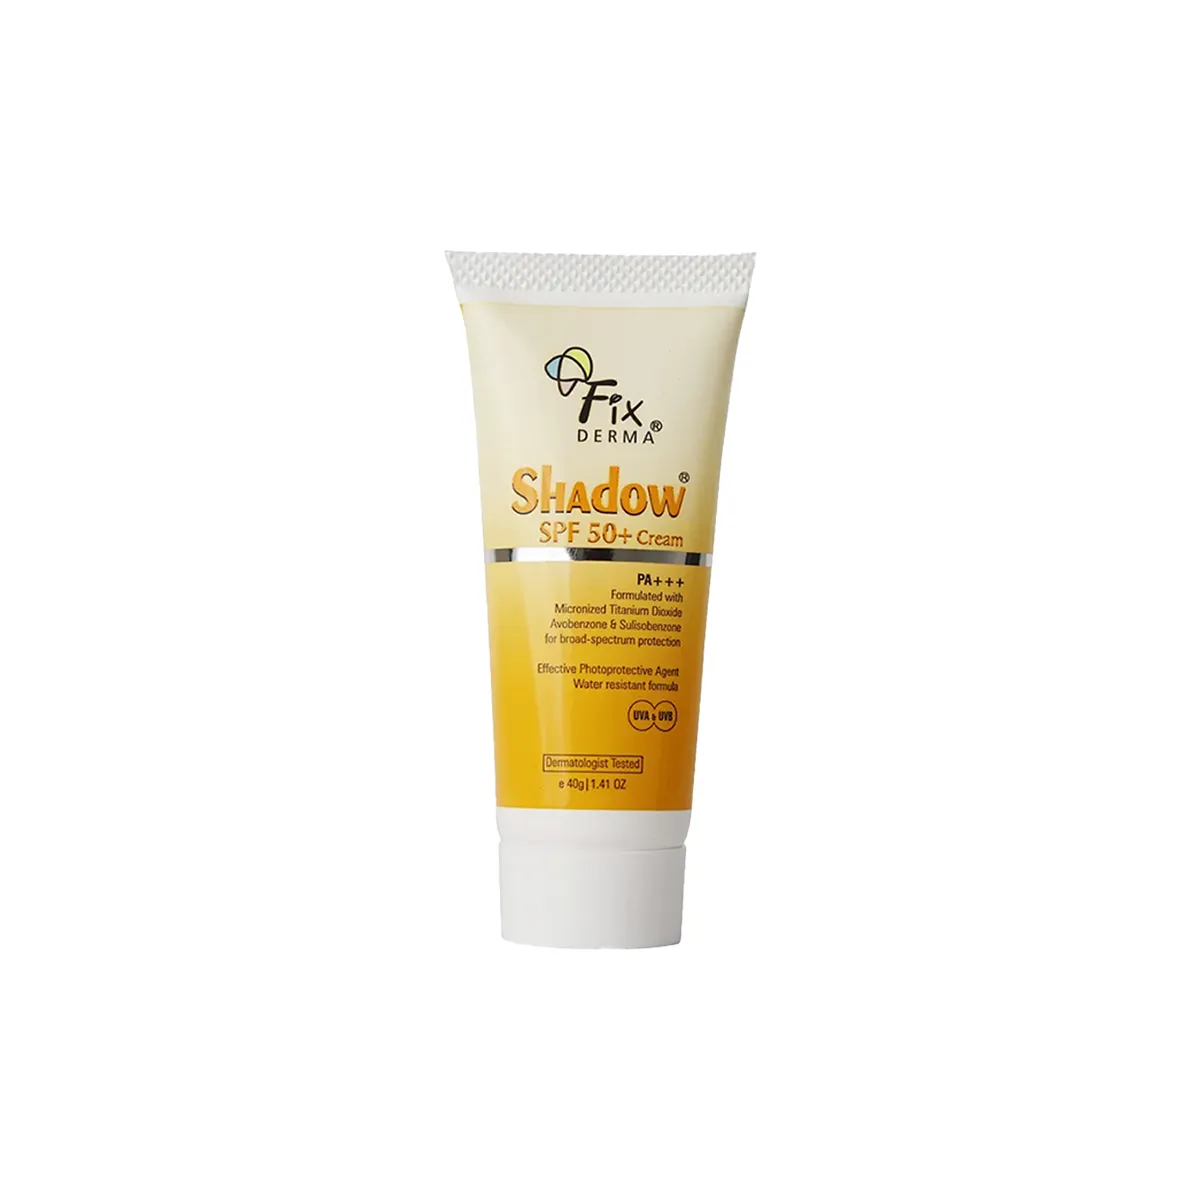 First product image of Fixderma Shadow Sunscreen Cream Spf 50 40g